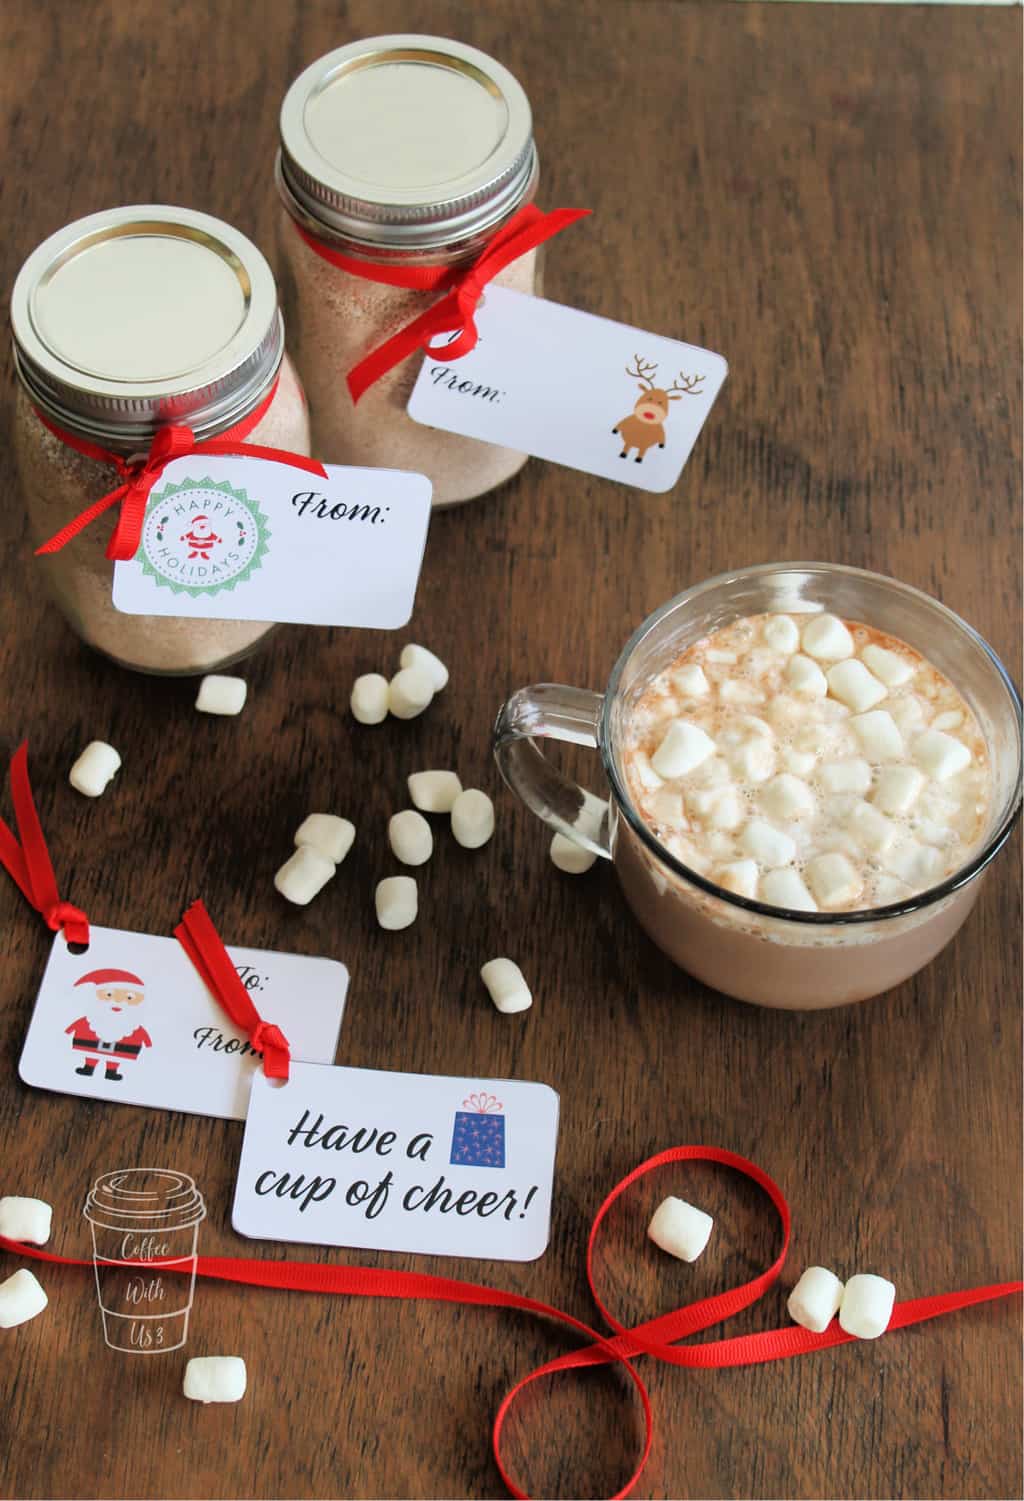 Homemade Hot Chocolate Mix paired with marshmallows and a mug makes a great gift for a teacher, coworker, neighbor, or friend.  Free printable gift tags included!